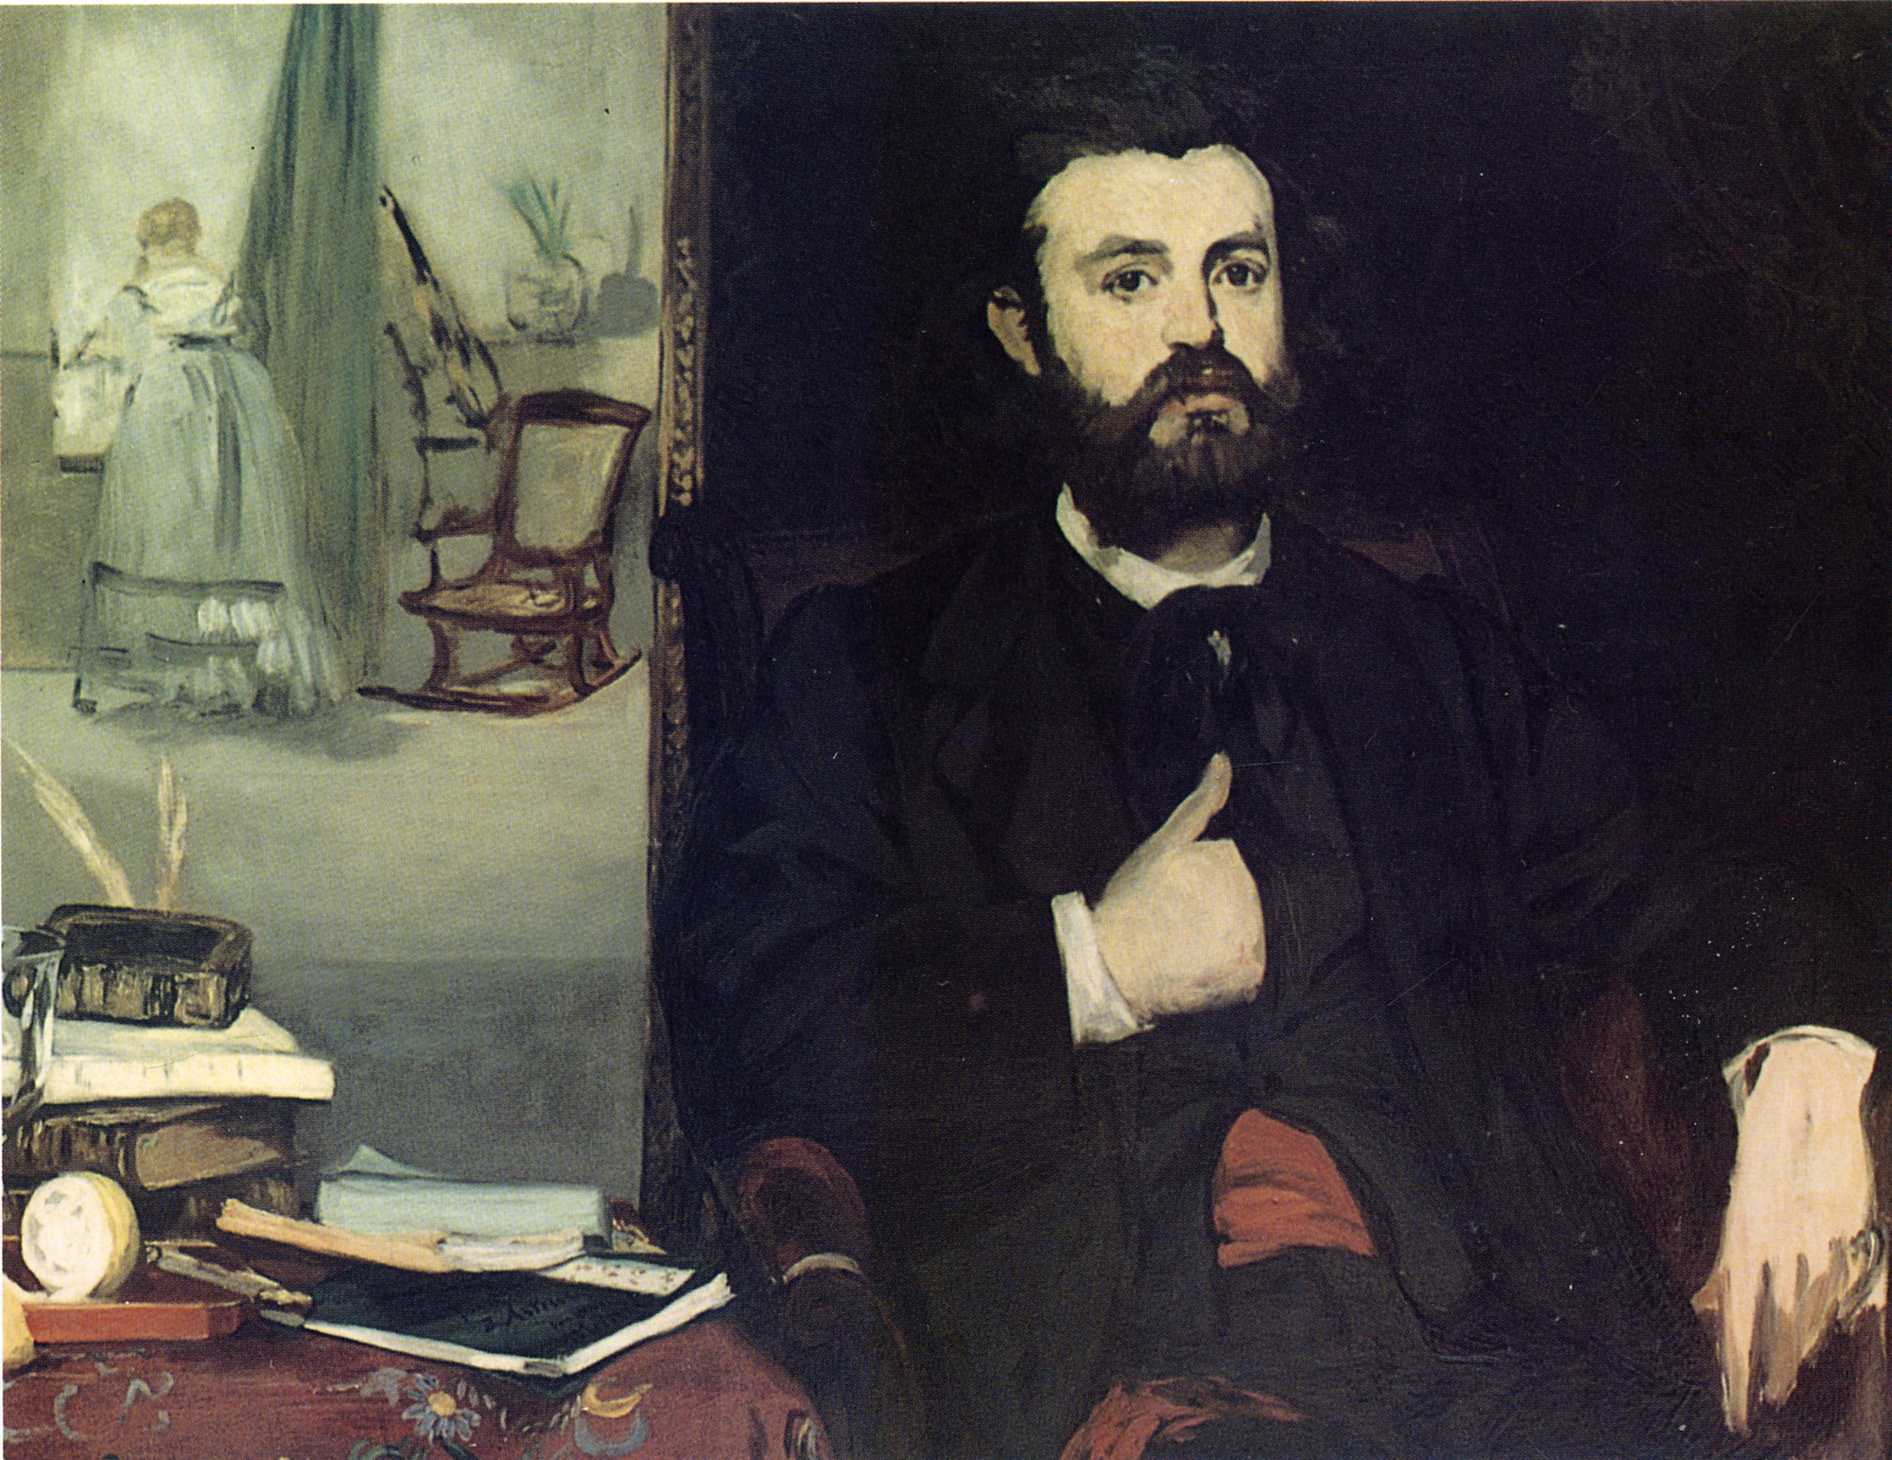 Manet: Not exhibited in his lifetime. The Daily Norm